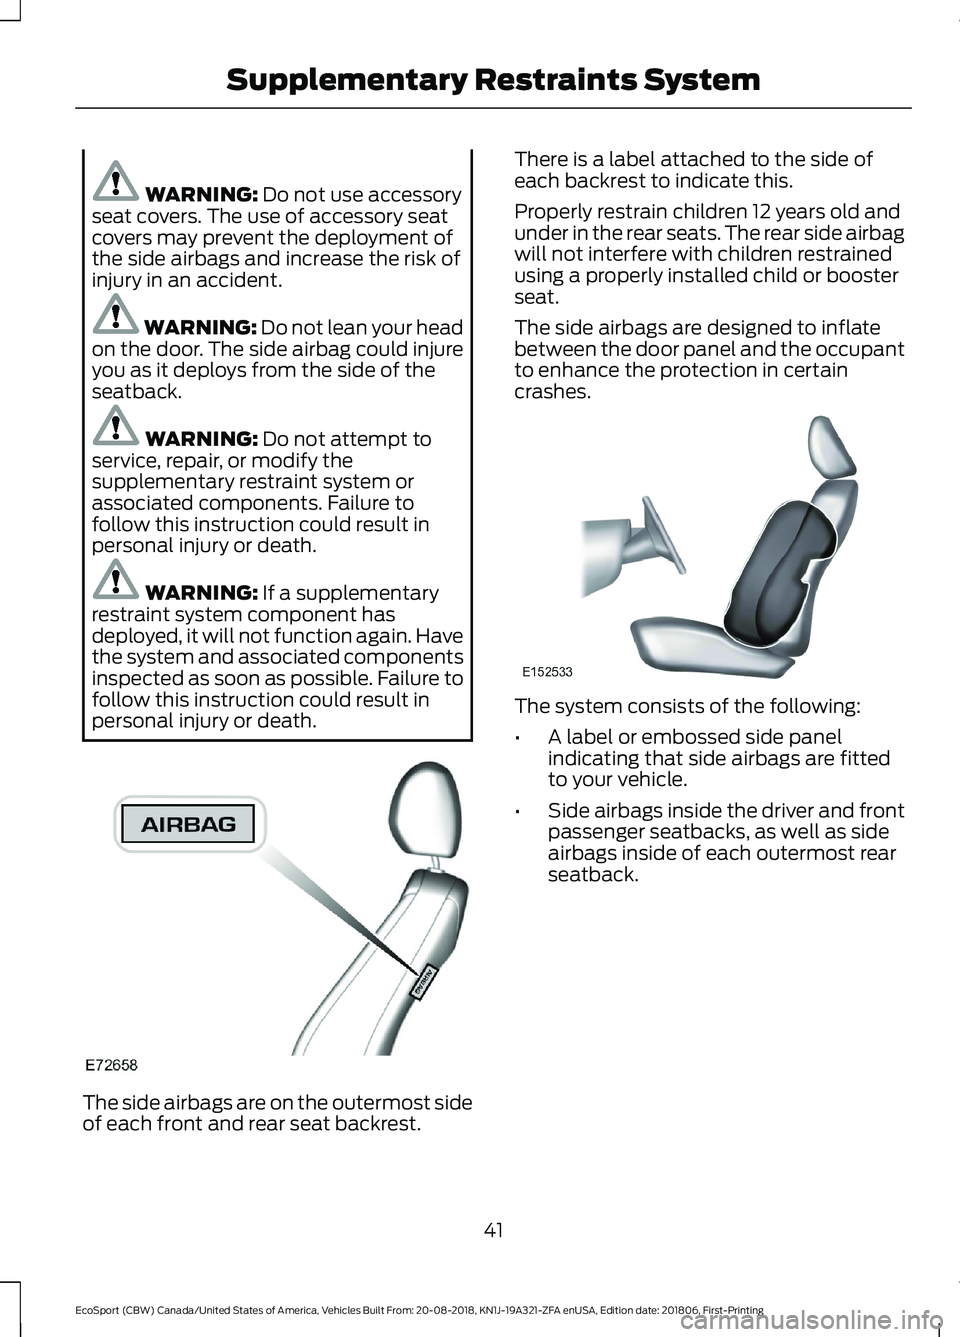 FORD ECOSPORT 2019 User Guide WARNING: Do not use accessoryseat covers. The use of accessory seatcovers may prevent the deployment ofthe side airbags and increase the risk ofinjury in an accident.
WARNING: Do not lean your headon 